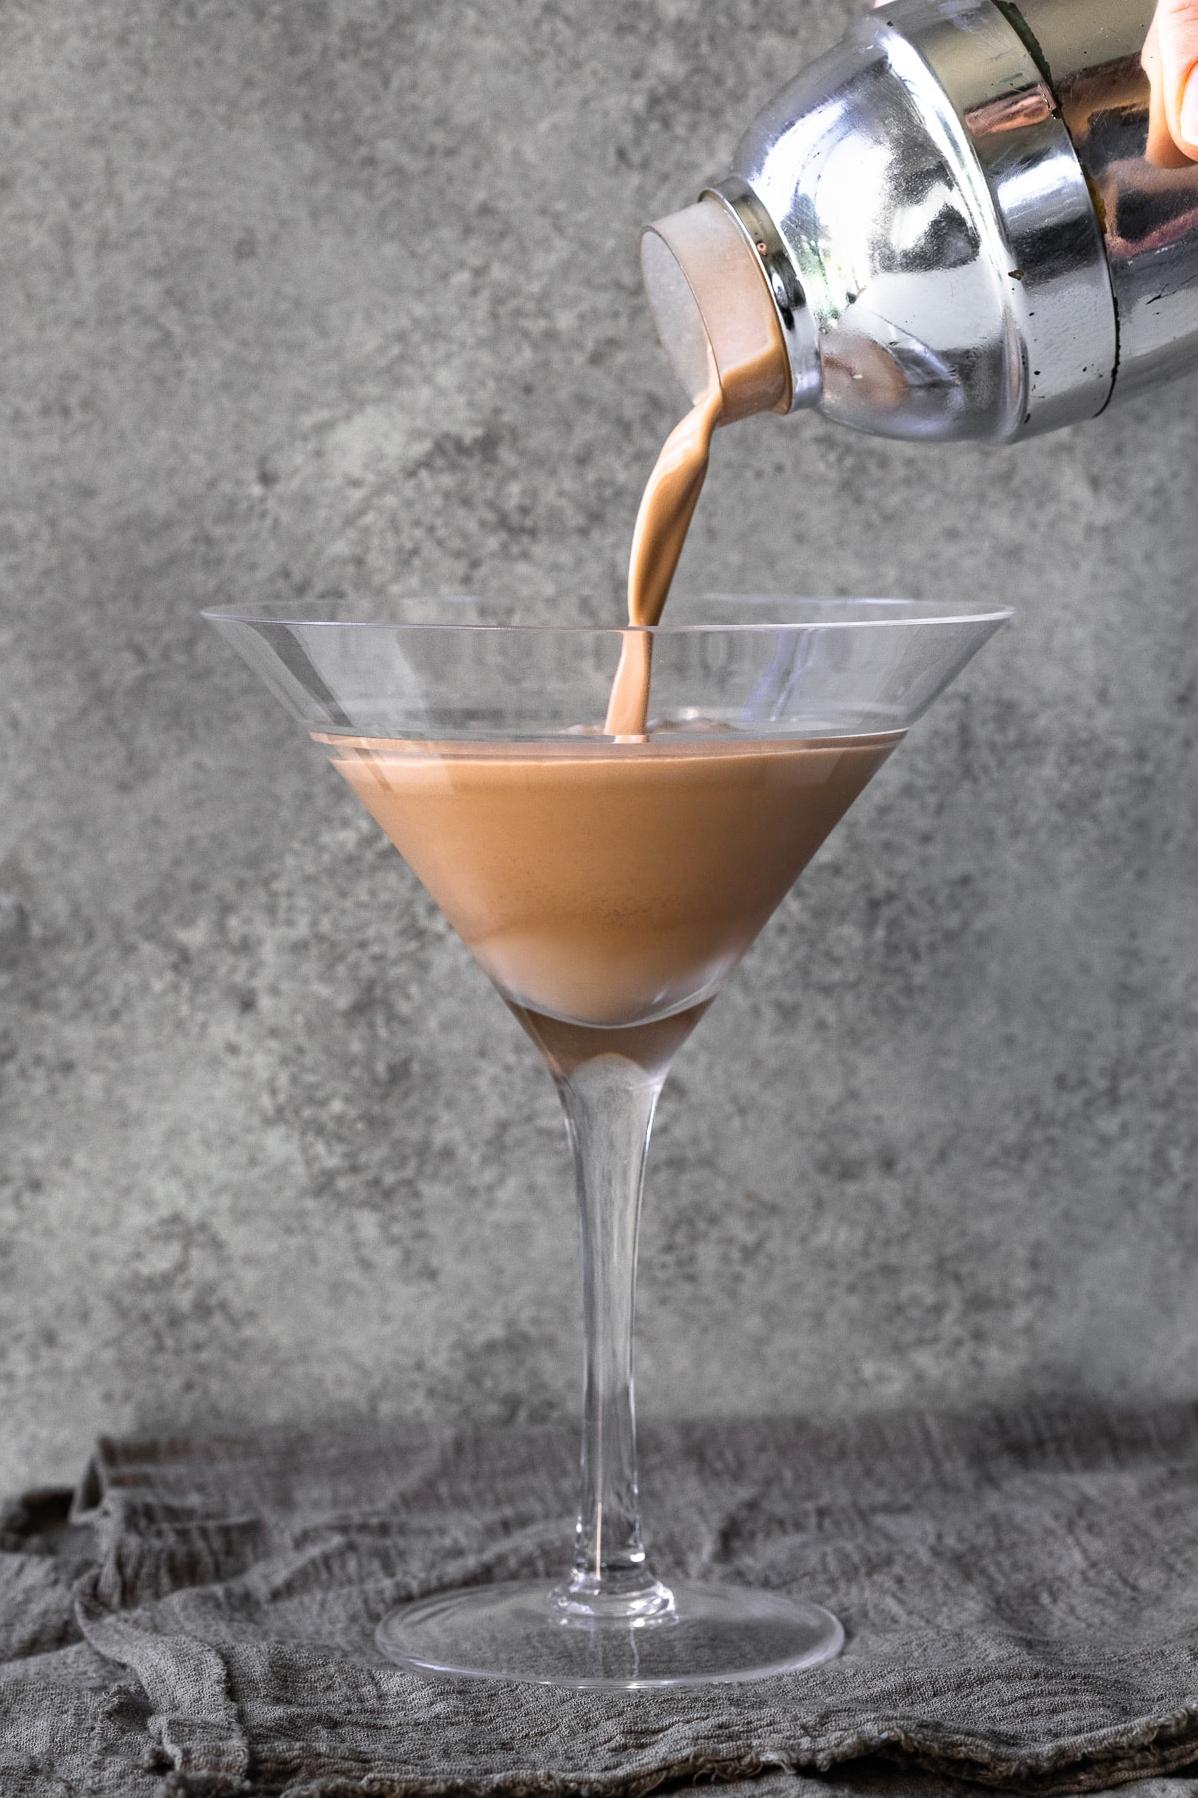  Satisfy your sweet tooth with this indulgent cocktail